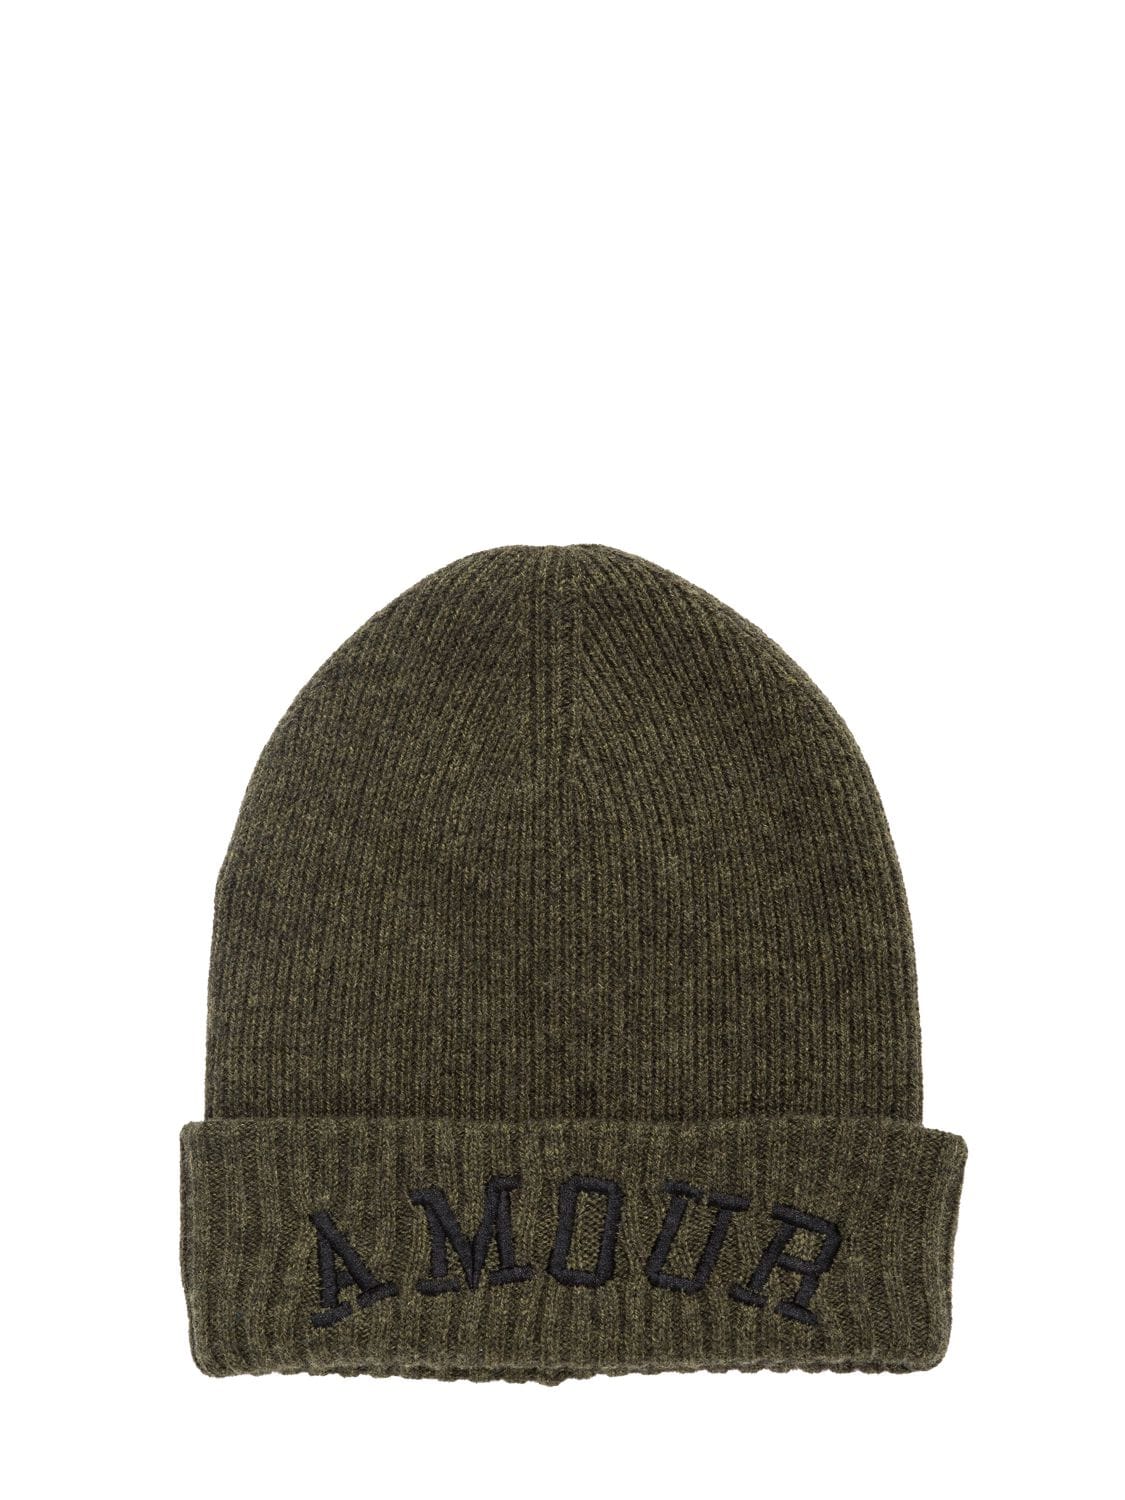 Image of Embroidered Wool Blend Knit Beanie